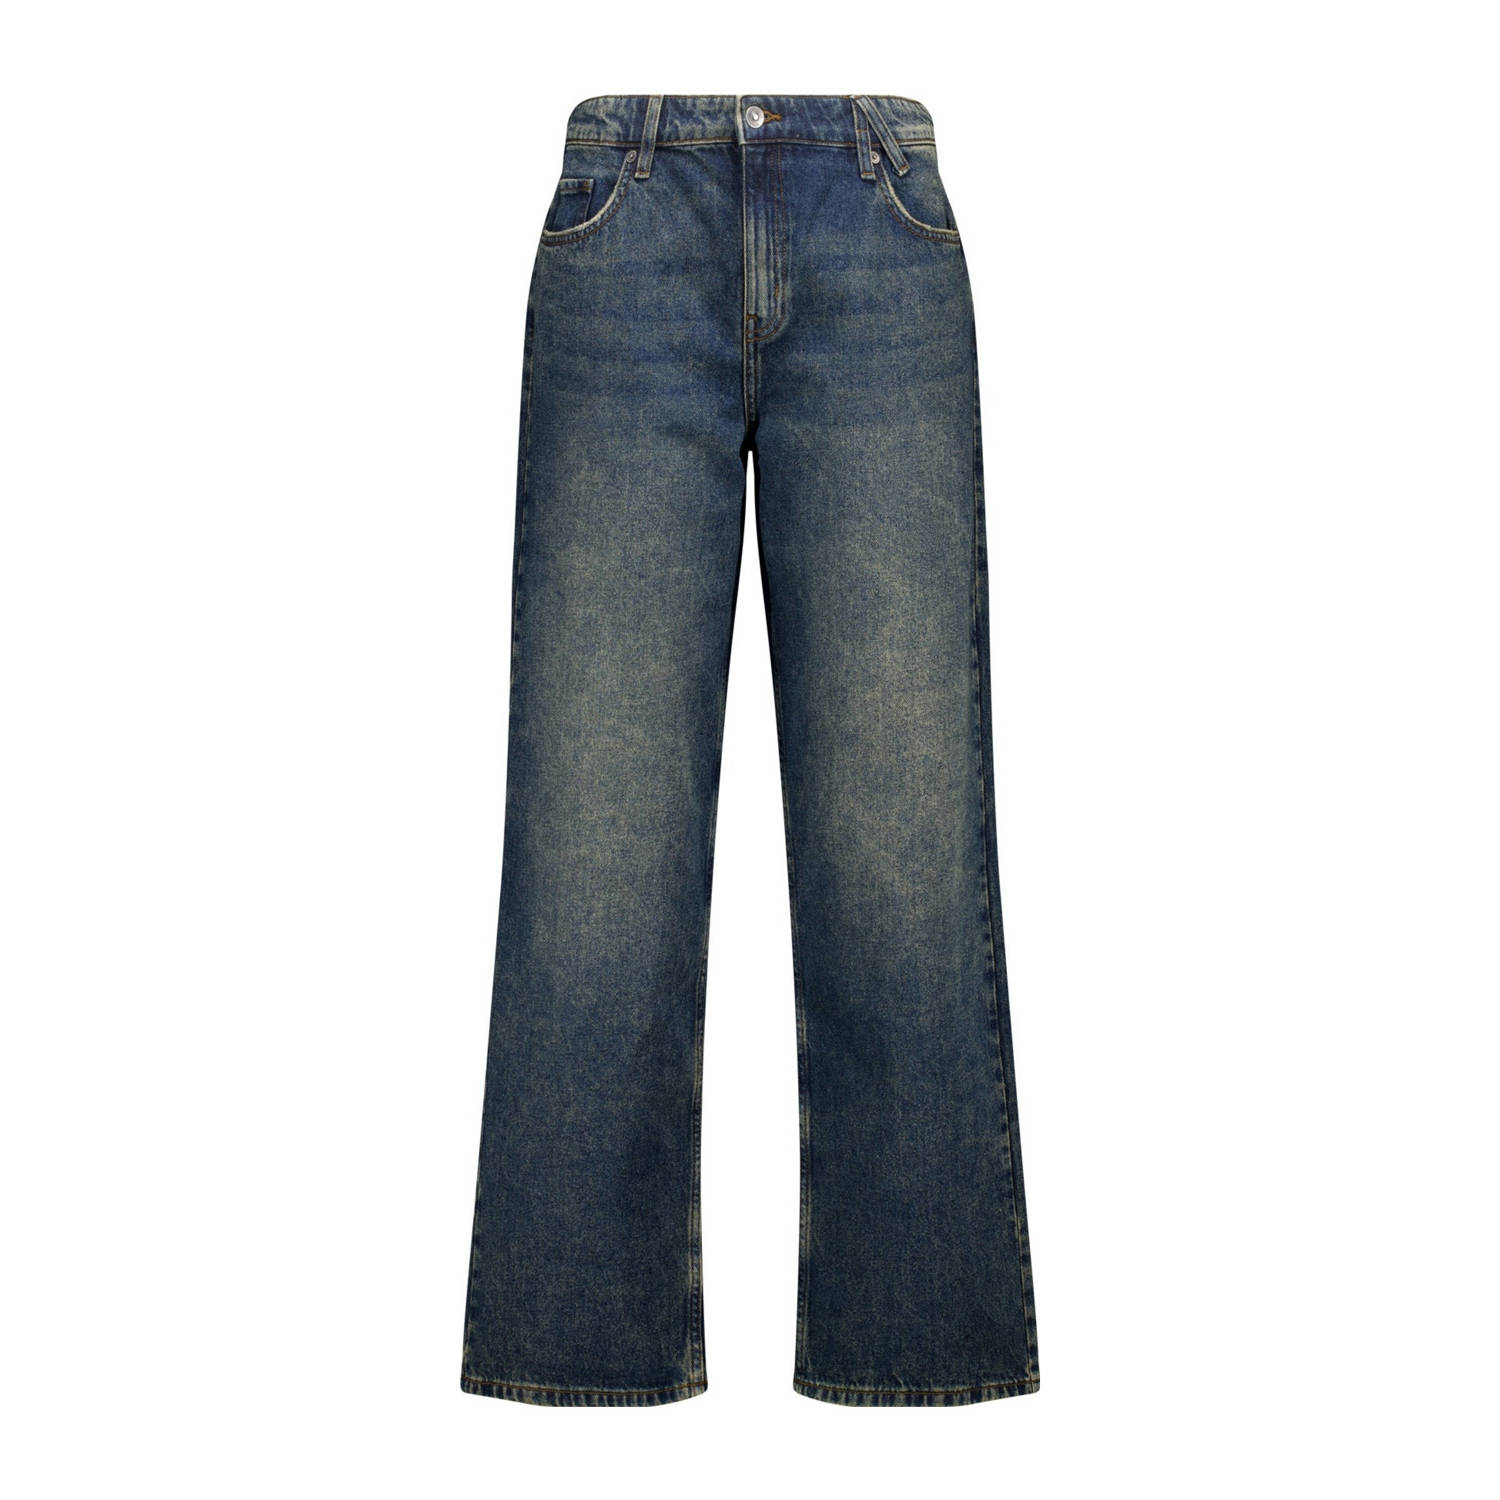 America Today wide leg jeans